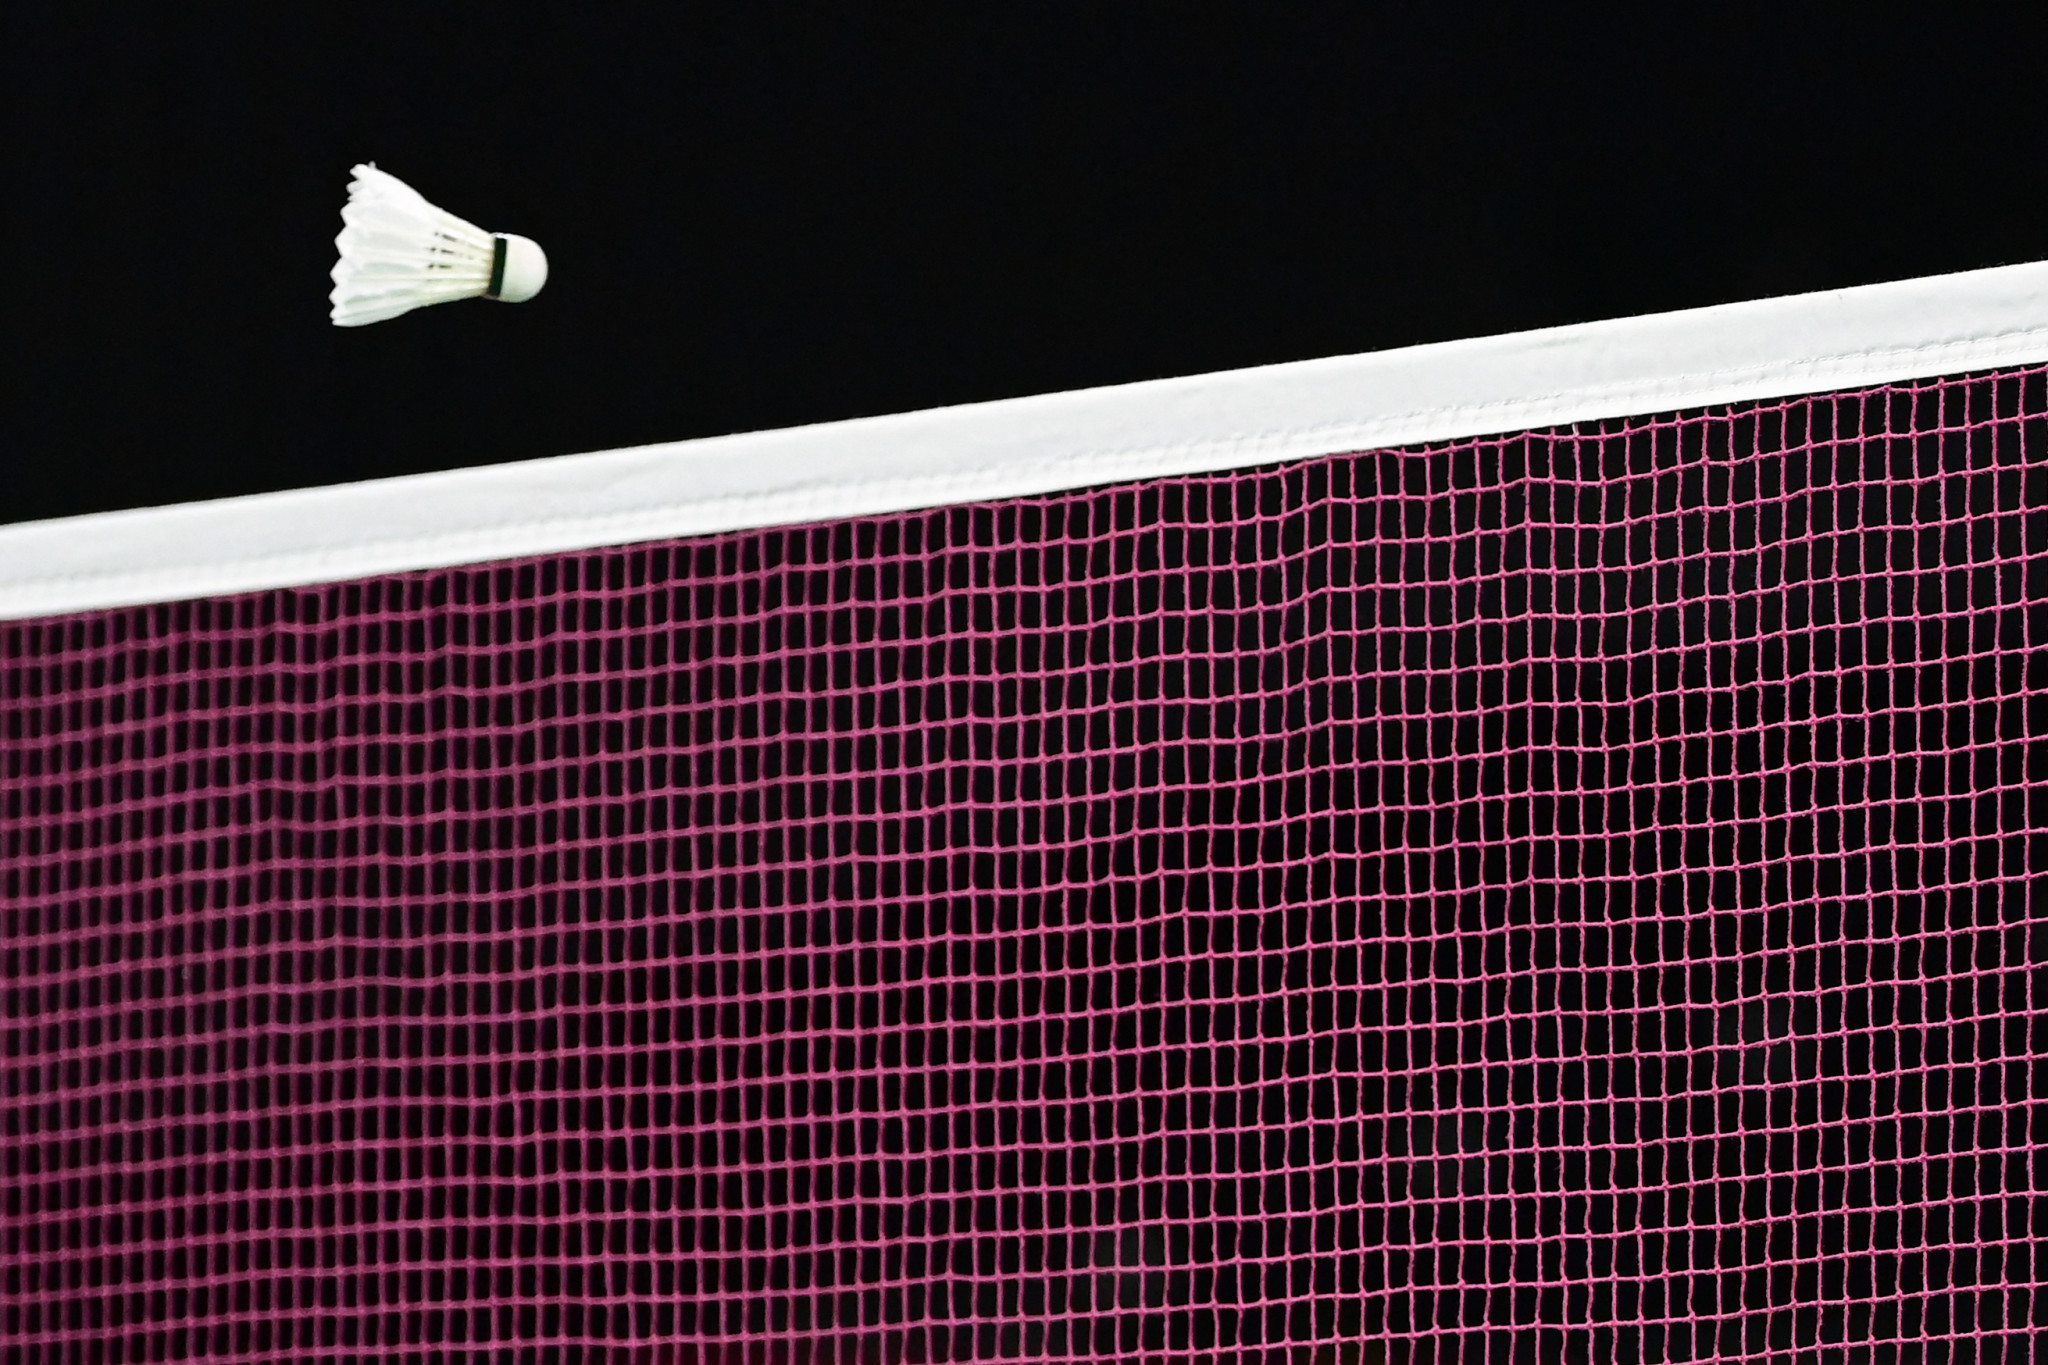 Badminton qualification process for Paris 2024 set to begin in May 2023